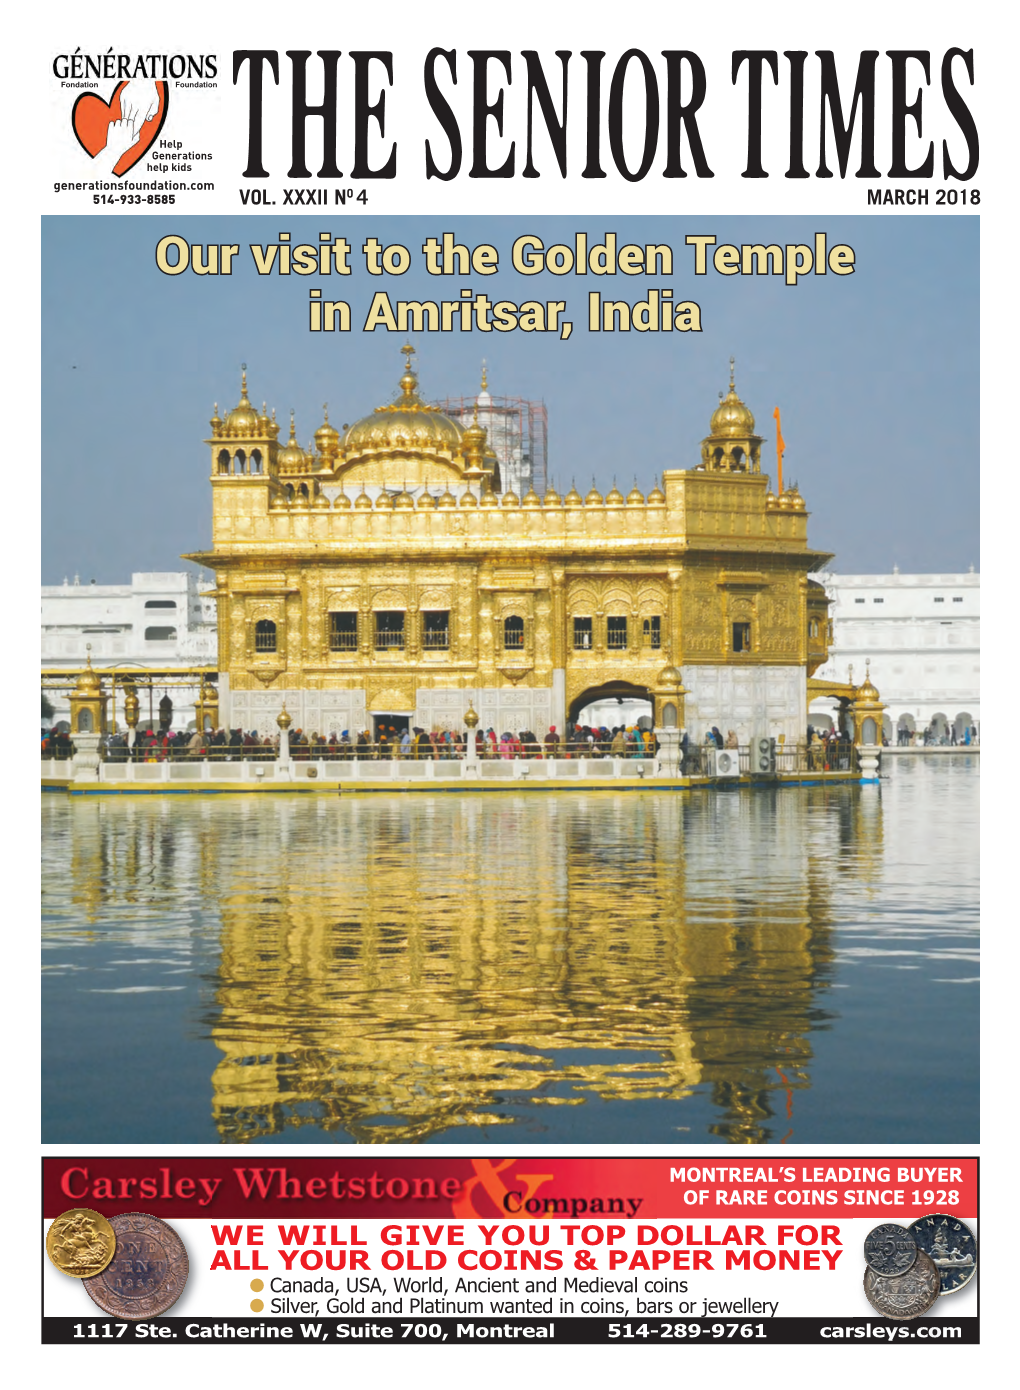 Our Visit to the Golden Temple in Amritsar, India